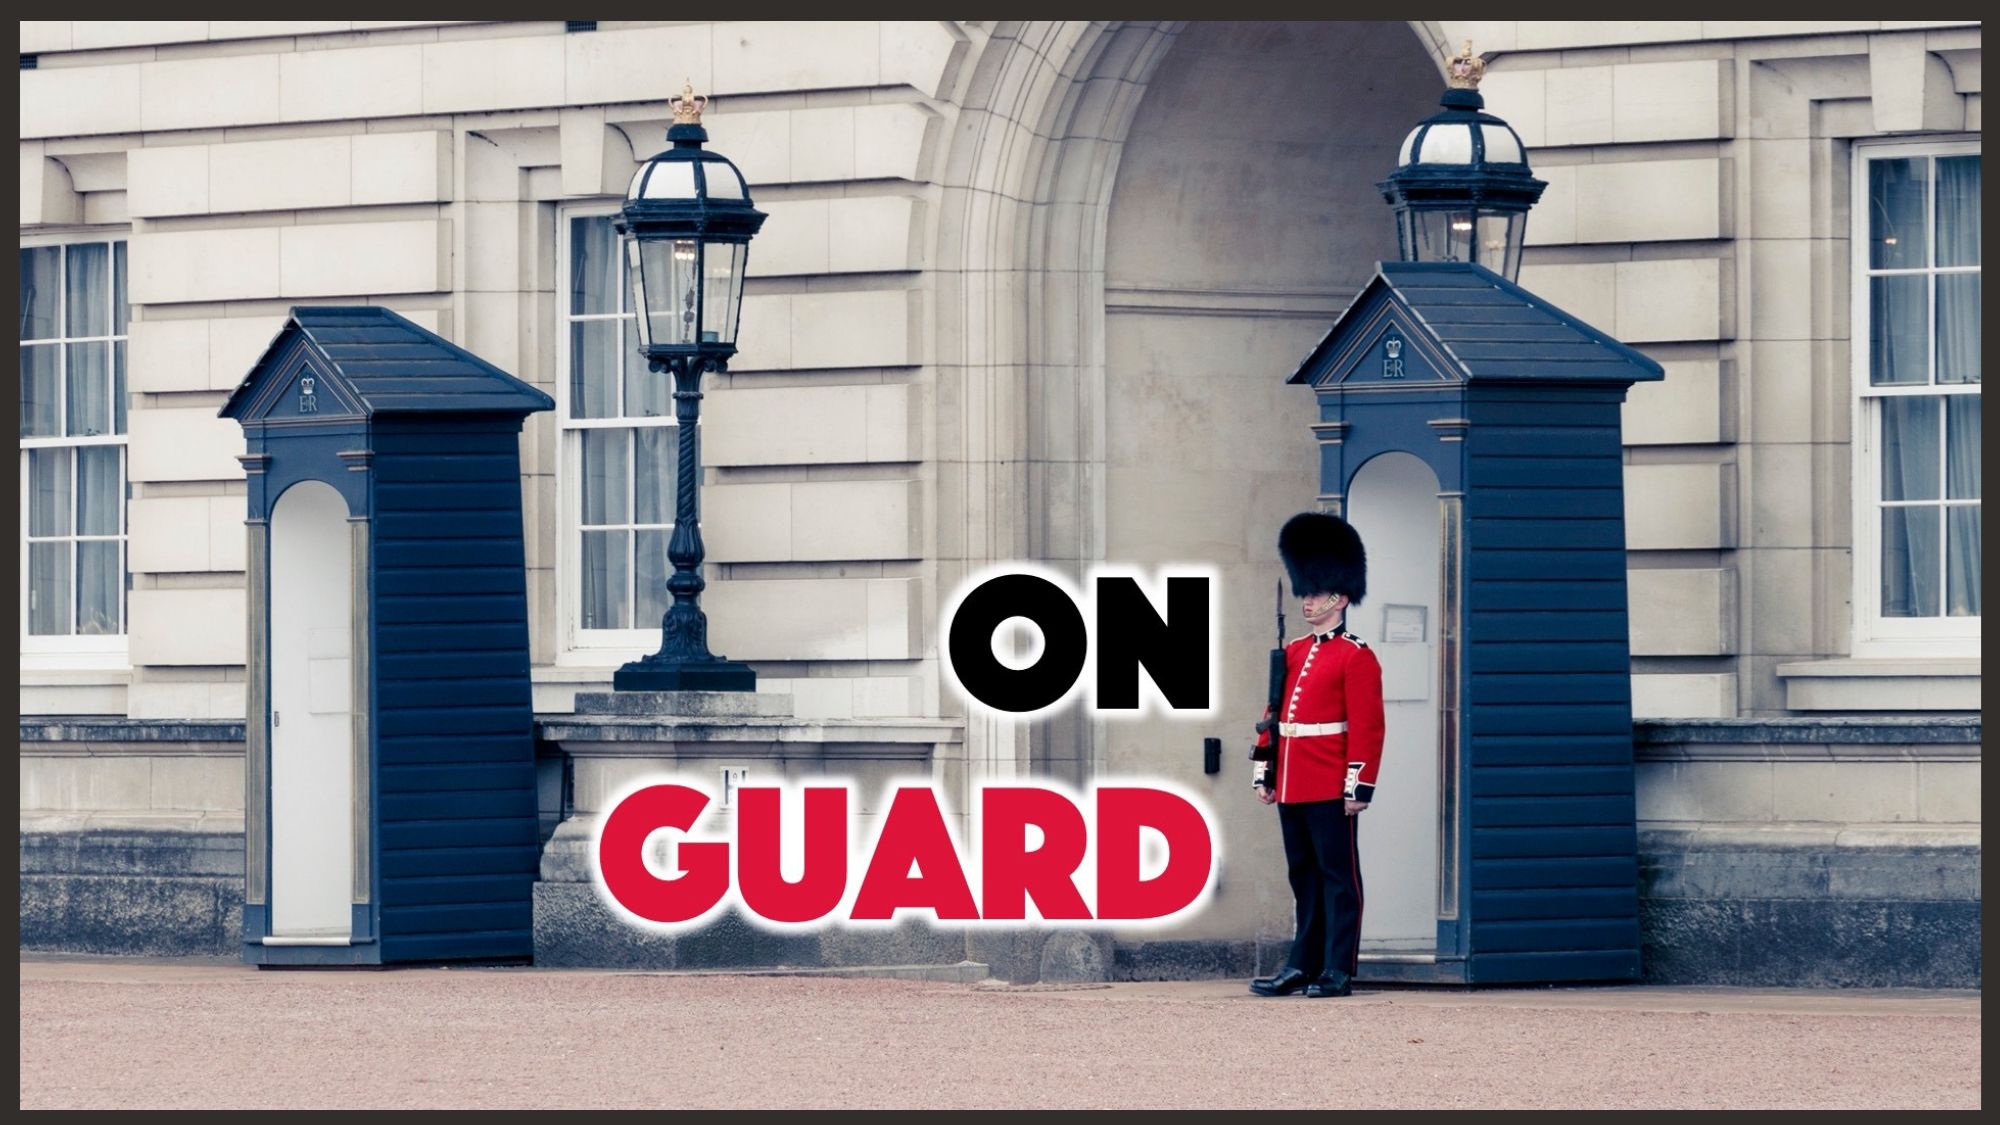 On Guard